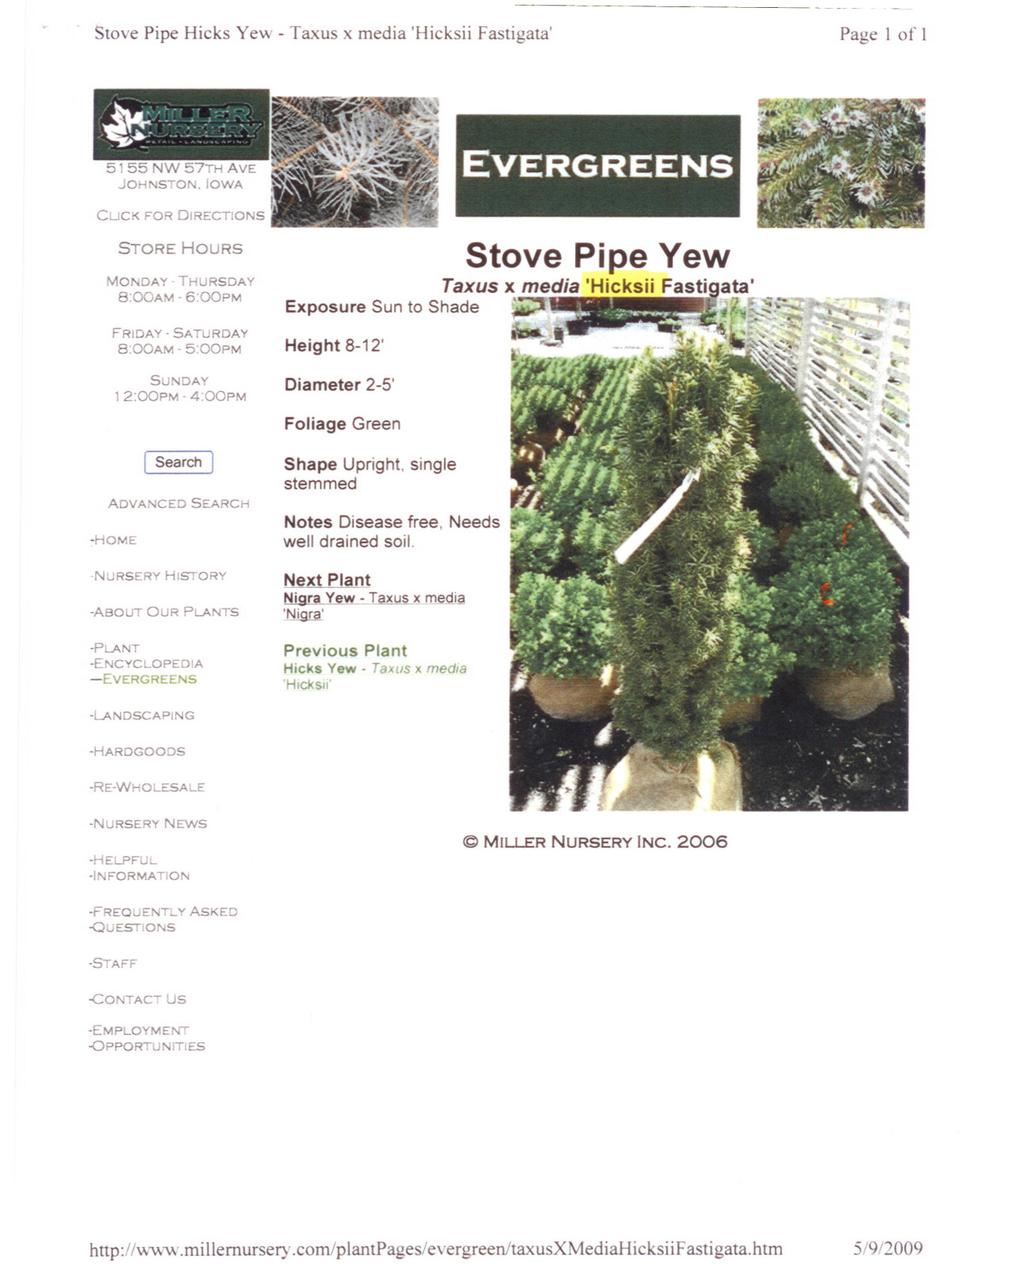 Stove Pipe Hicks Yew - Taxus x media 'Hicksii Fastigata' Page 1 of 1 STORE HOURS MONDAY - THURSDAY 8:00AM - 6:00PM FRIDAY - SATURDAY 8:00AM - 5:00PM,.